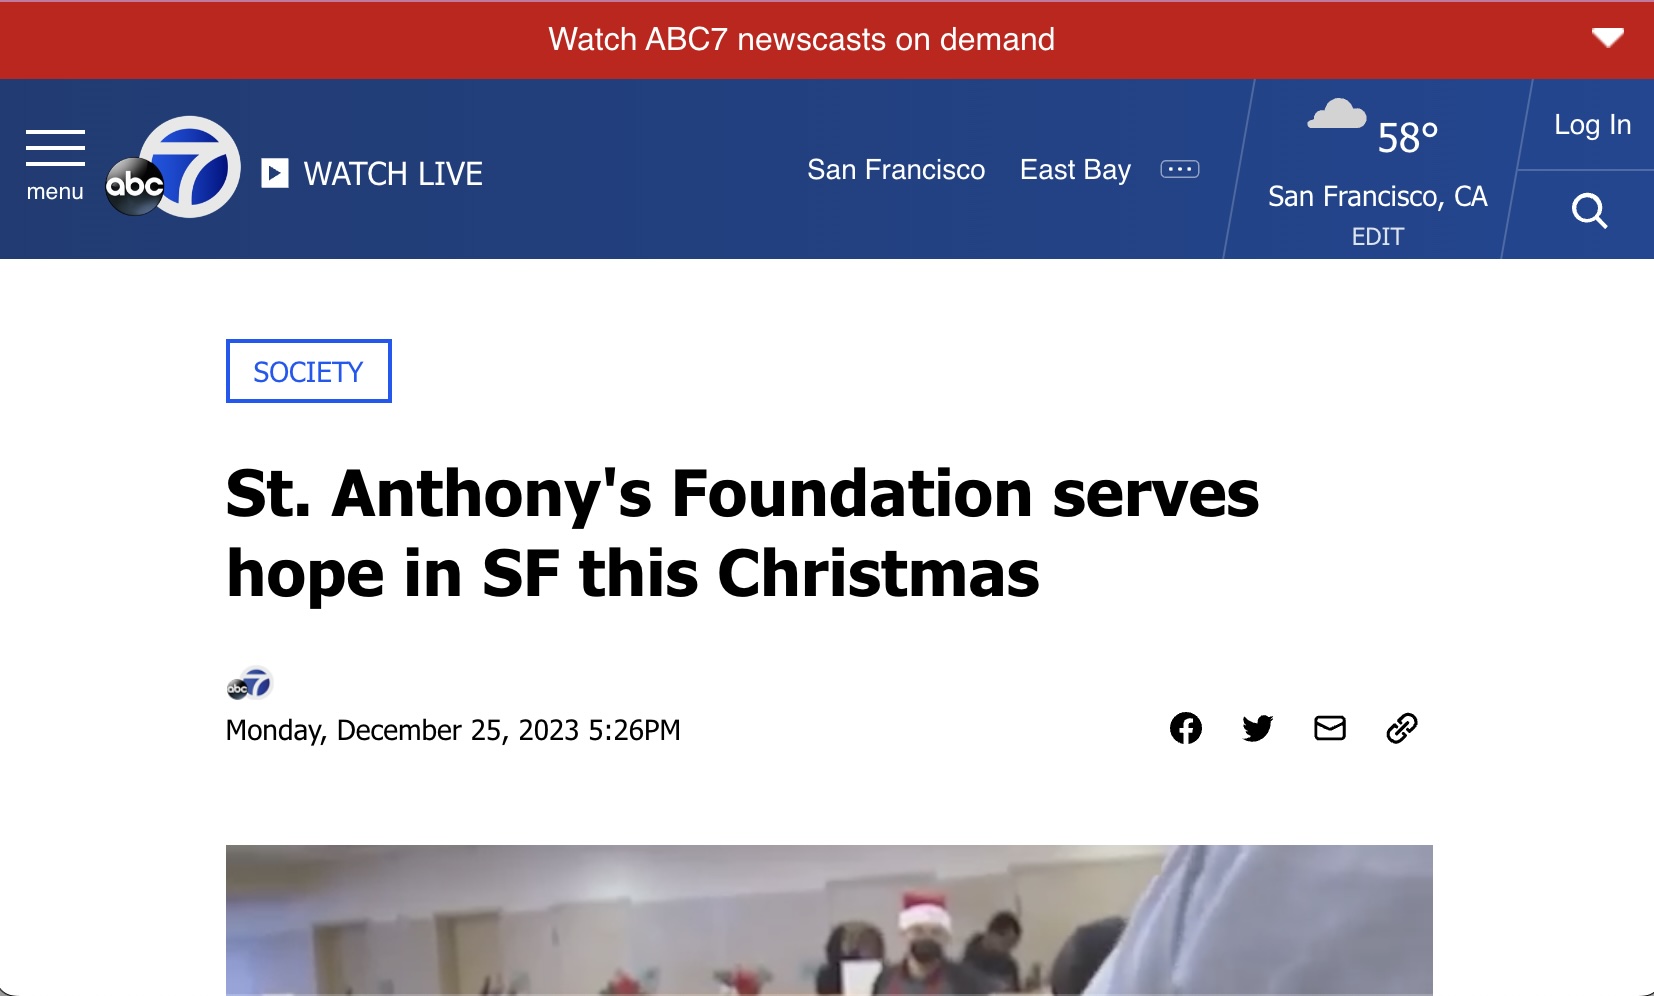 ABC 7 News: St. Anthony’s Foundation serves hope in SF this Christmas